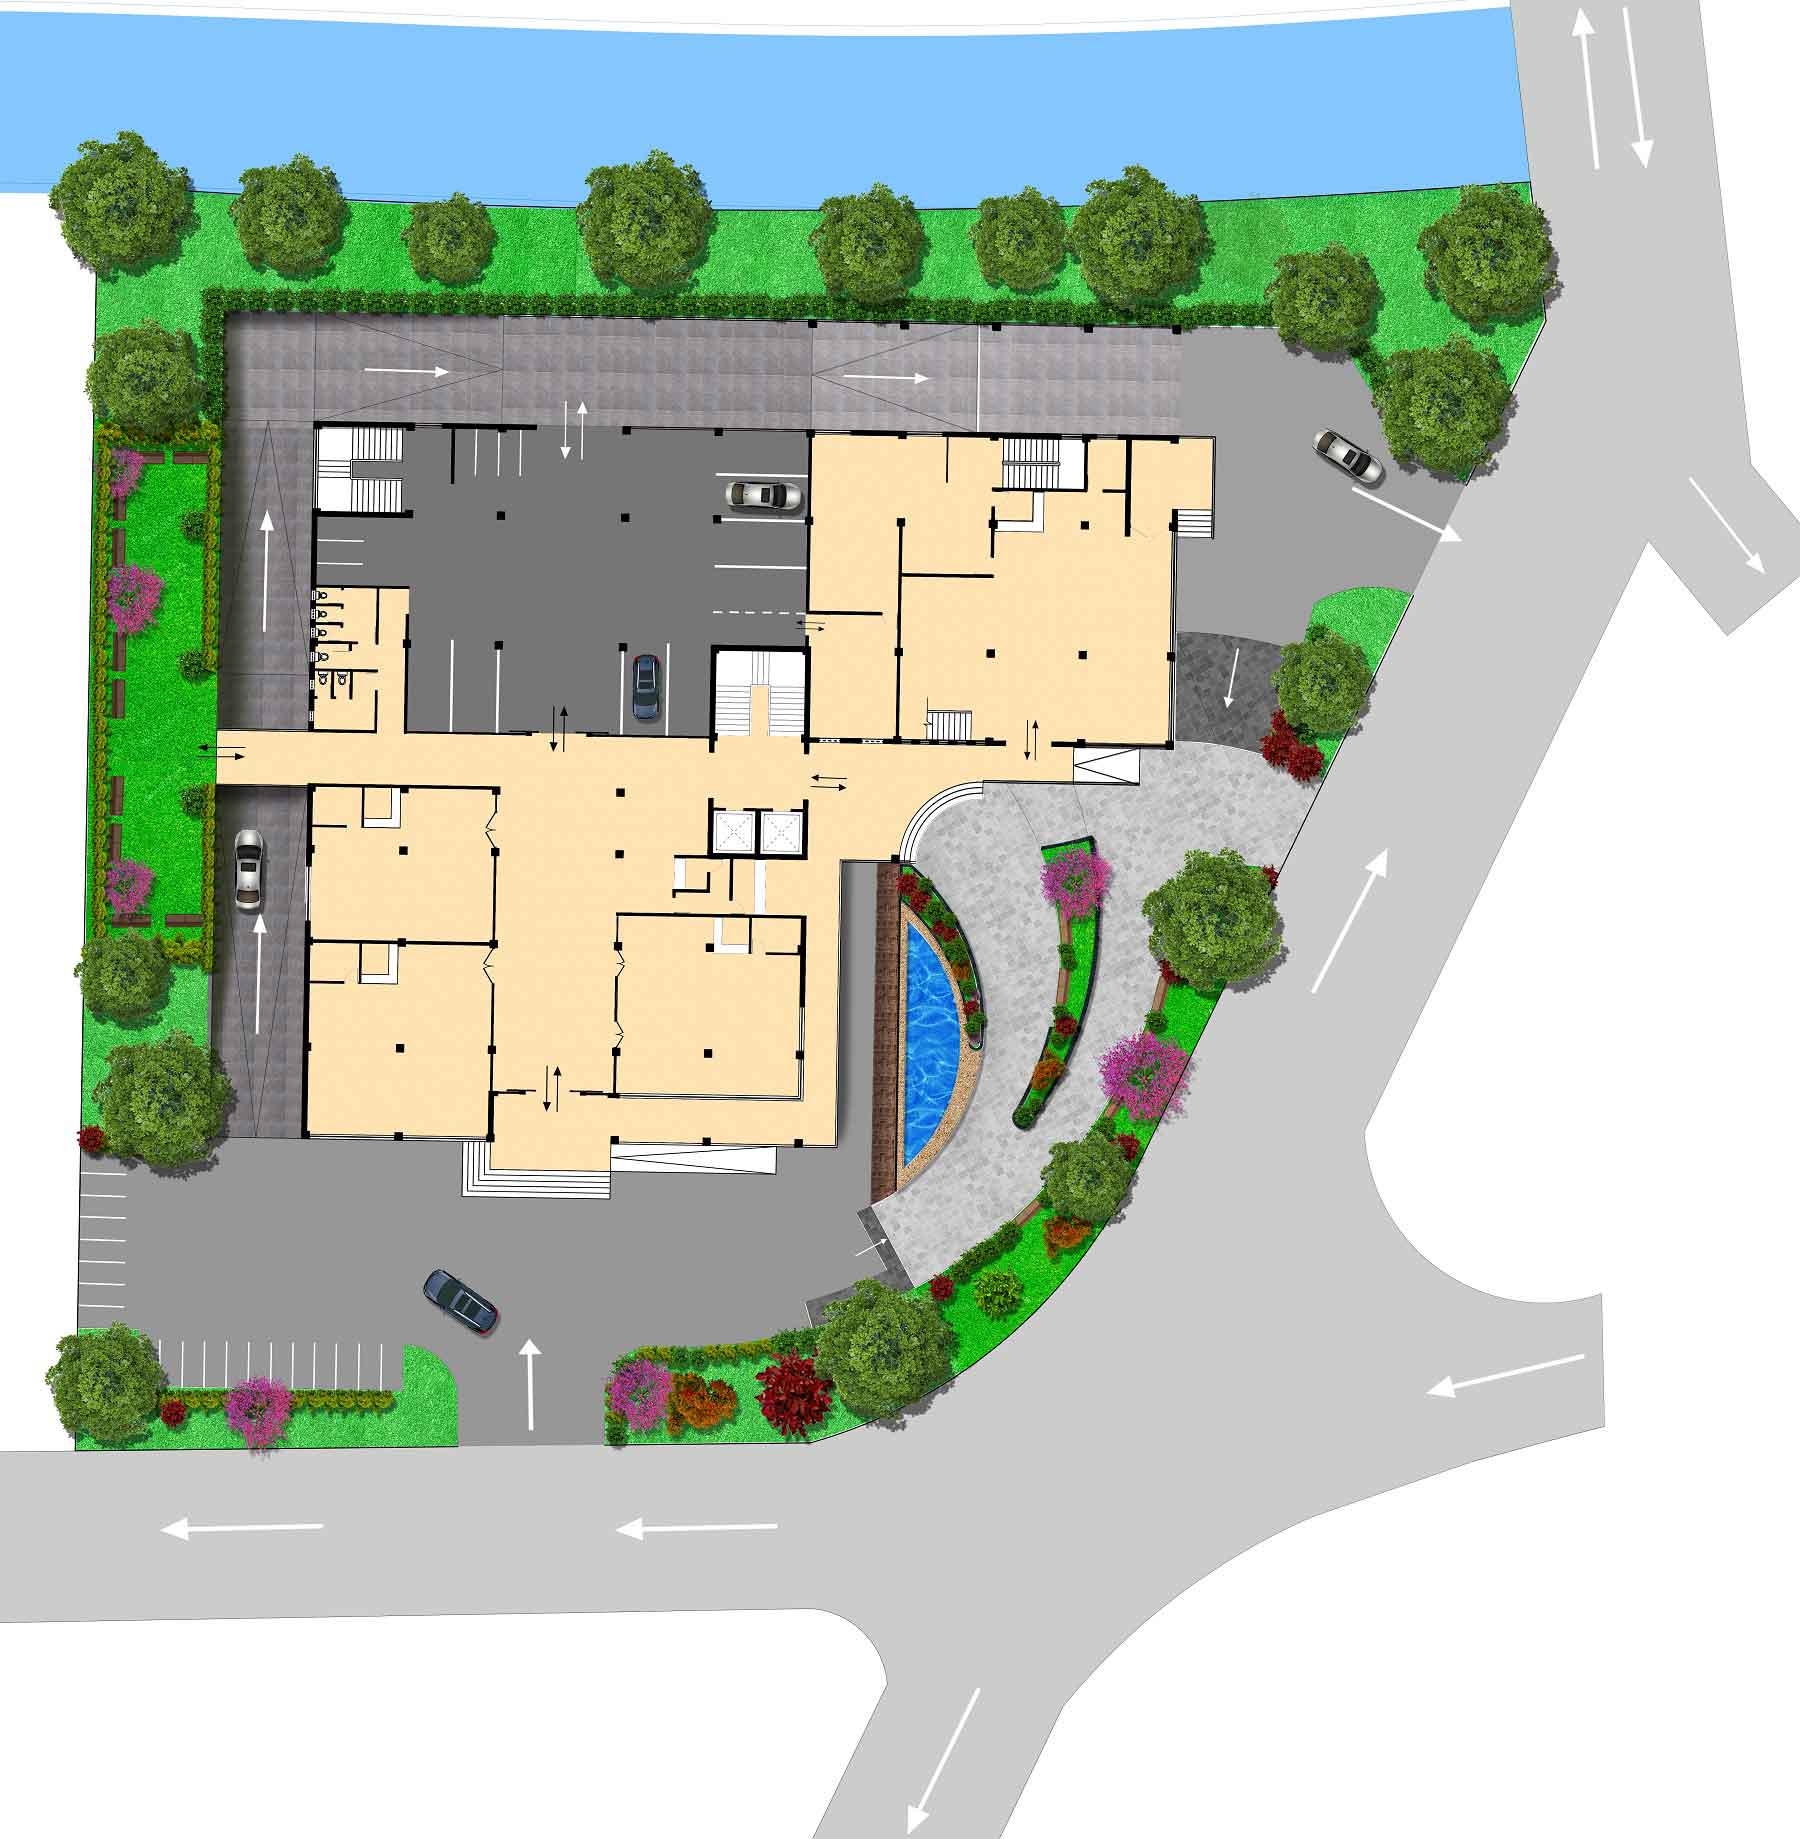 Floor Plan Of A Small Shopping Centre Floorplans Click